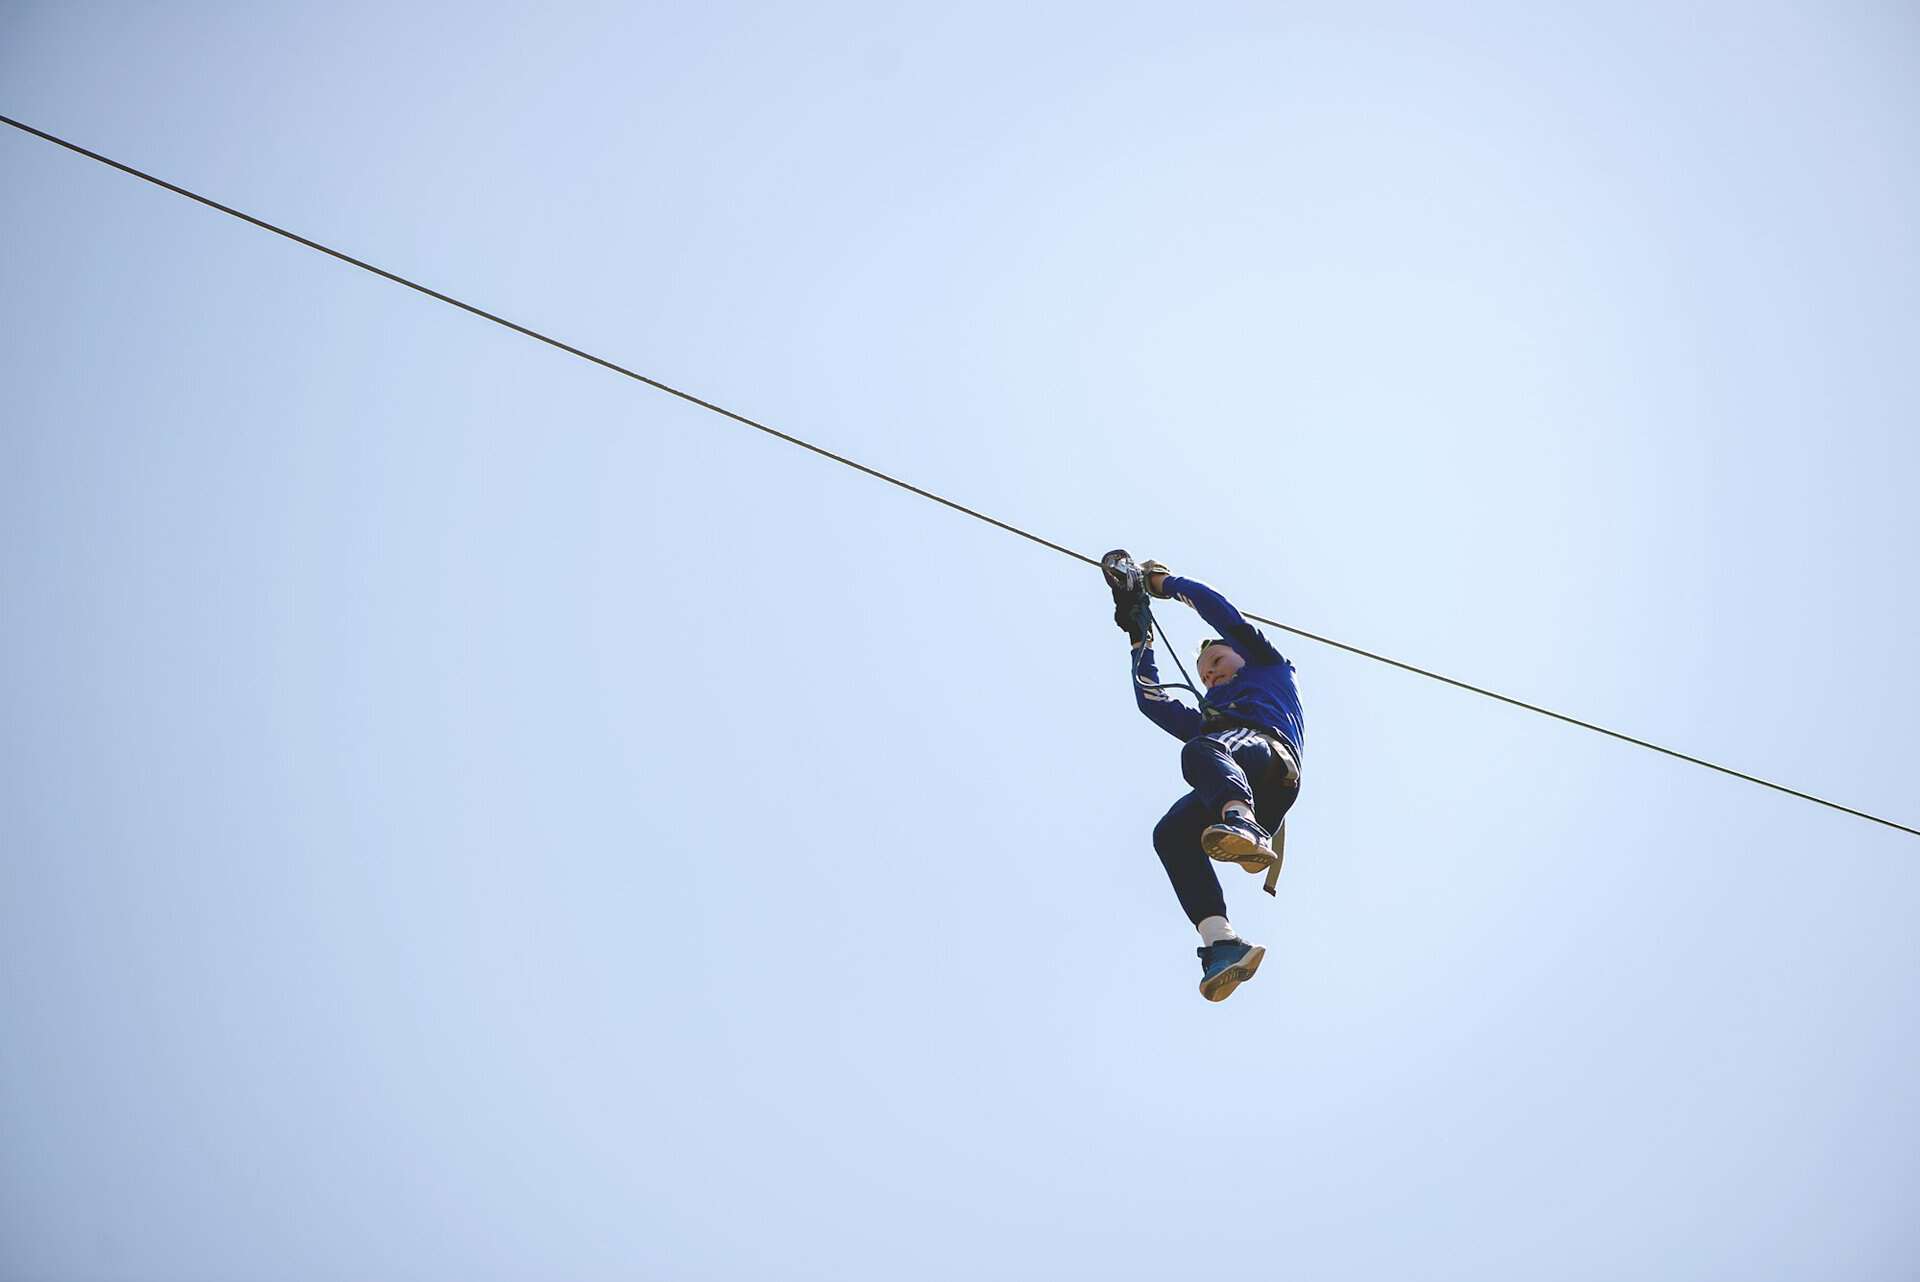 Rear view of young boy riding on zip line against blue sky